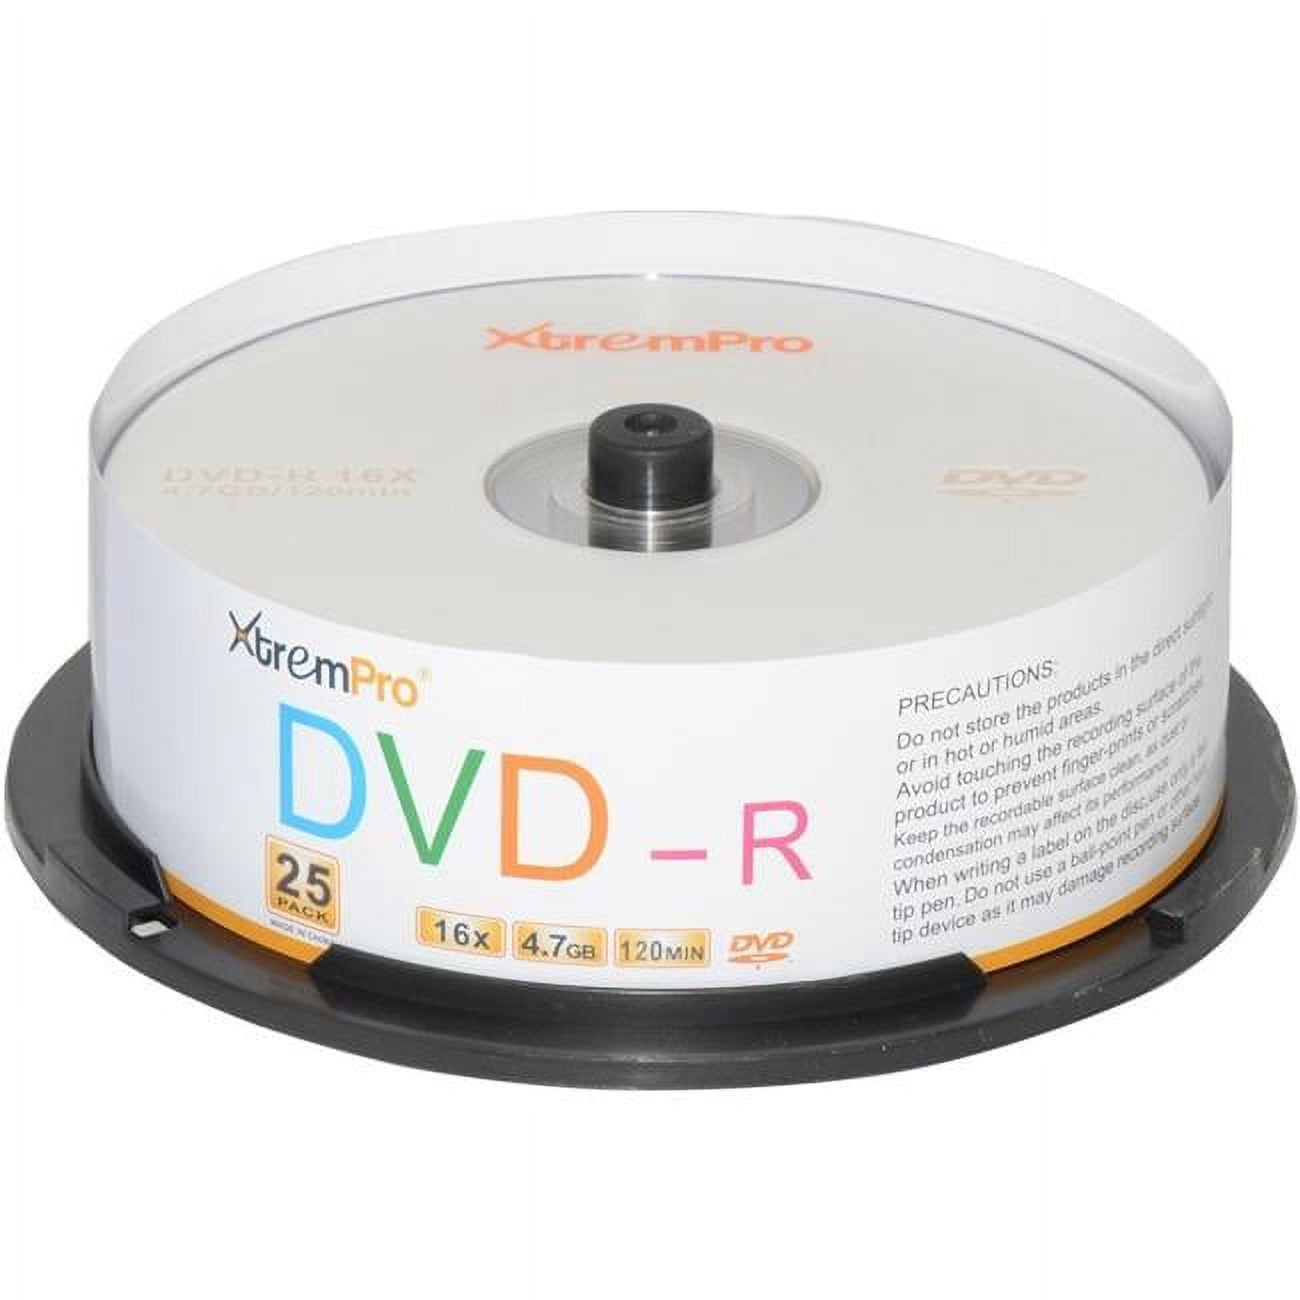 Xtrempro DVD-R 16x 4.7GB 120Min DVD 25 Pack Blank Discs in Spindle - 11031